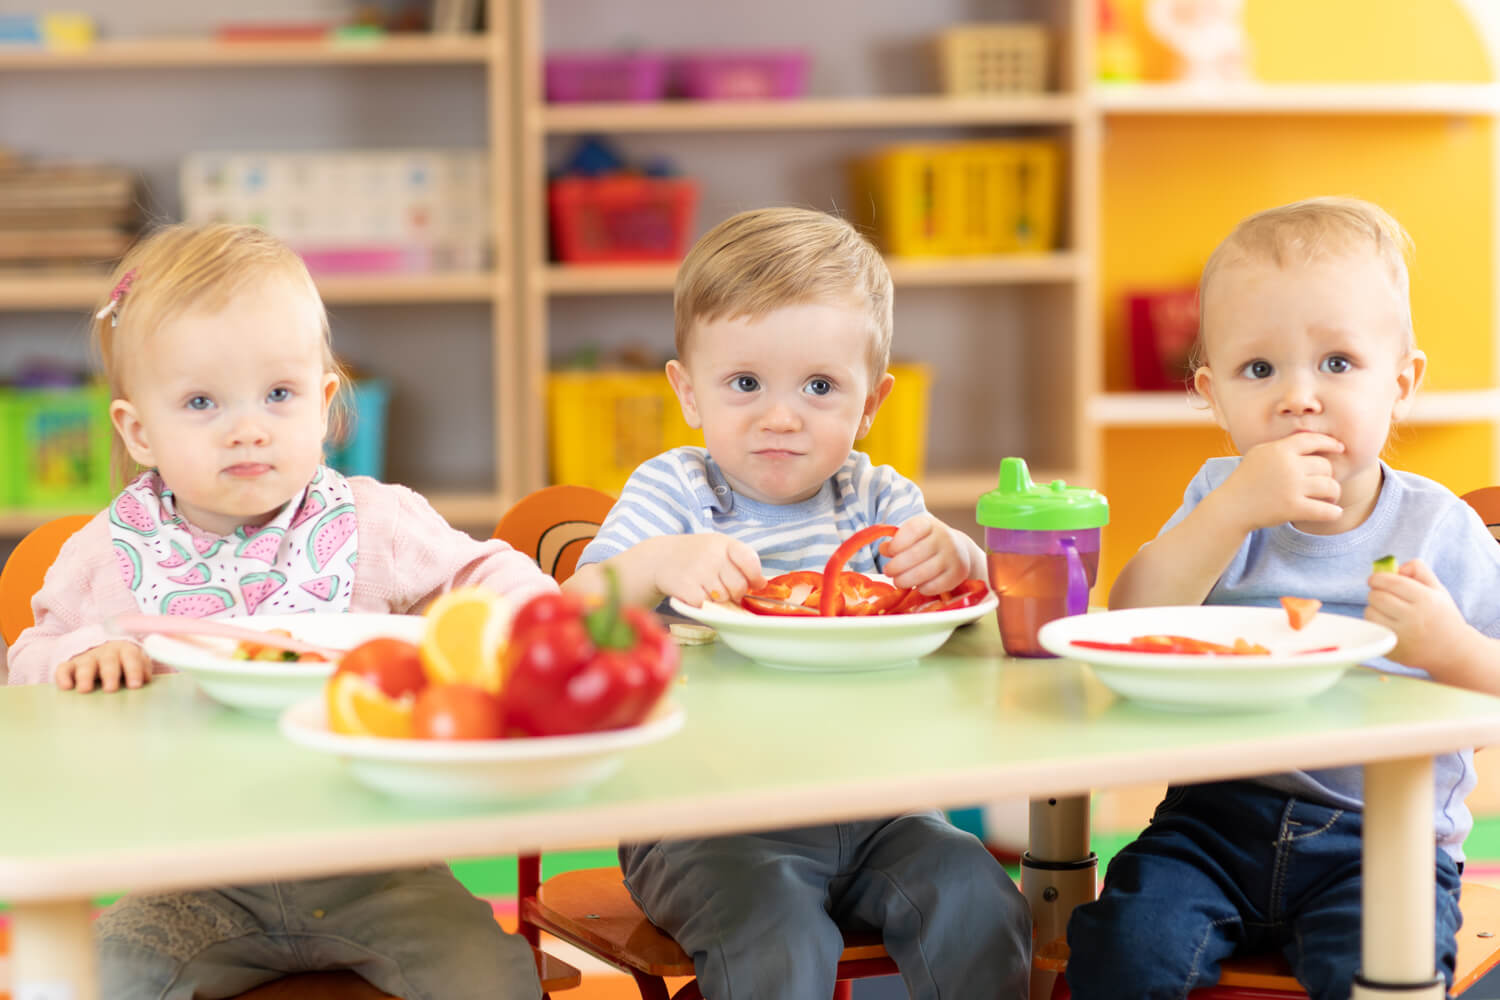 15 Healthy Baby Food Ideas When Leaving Your Baby In Daycare